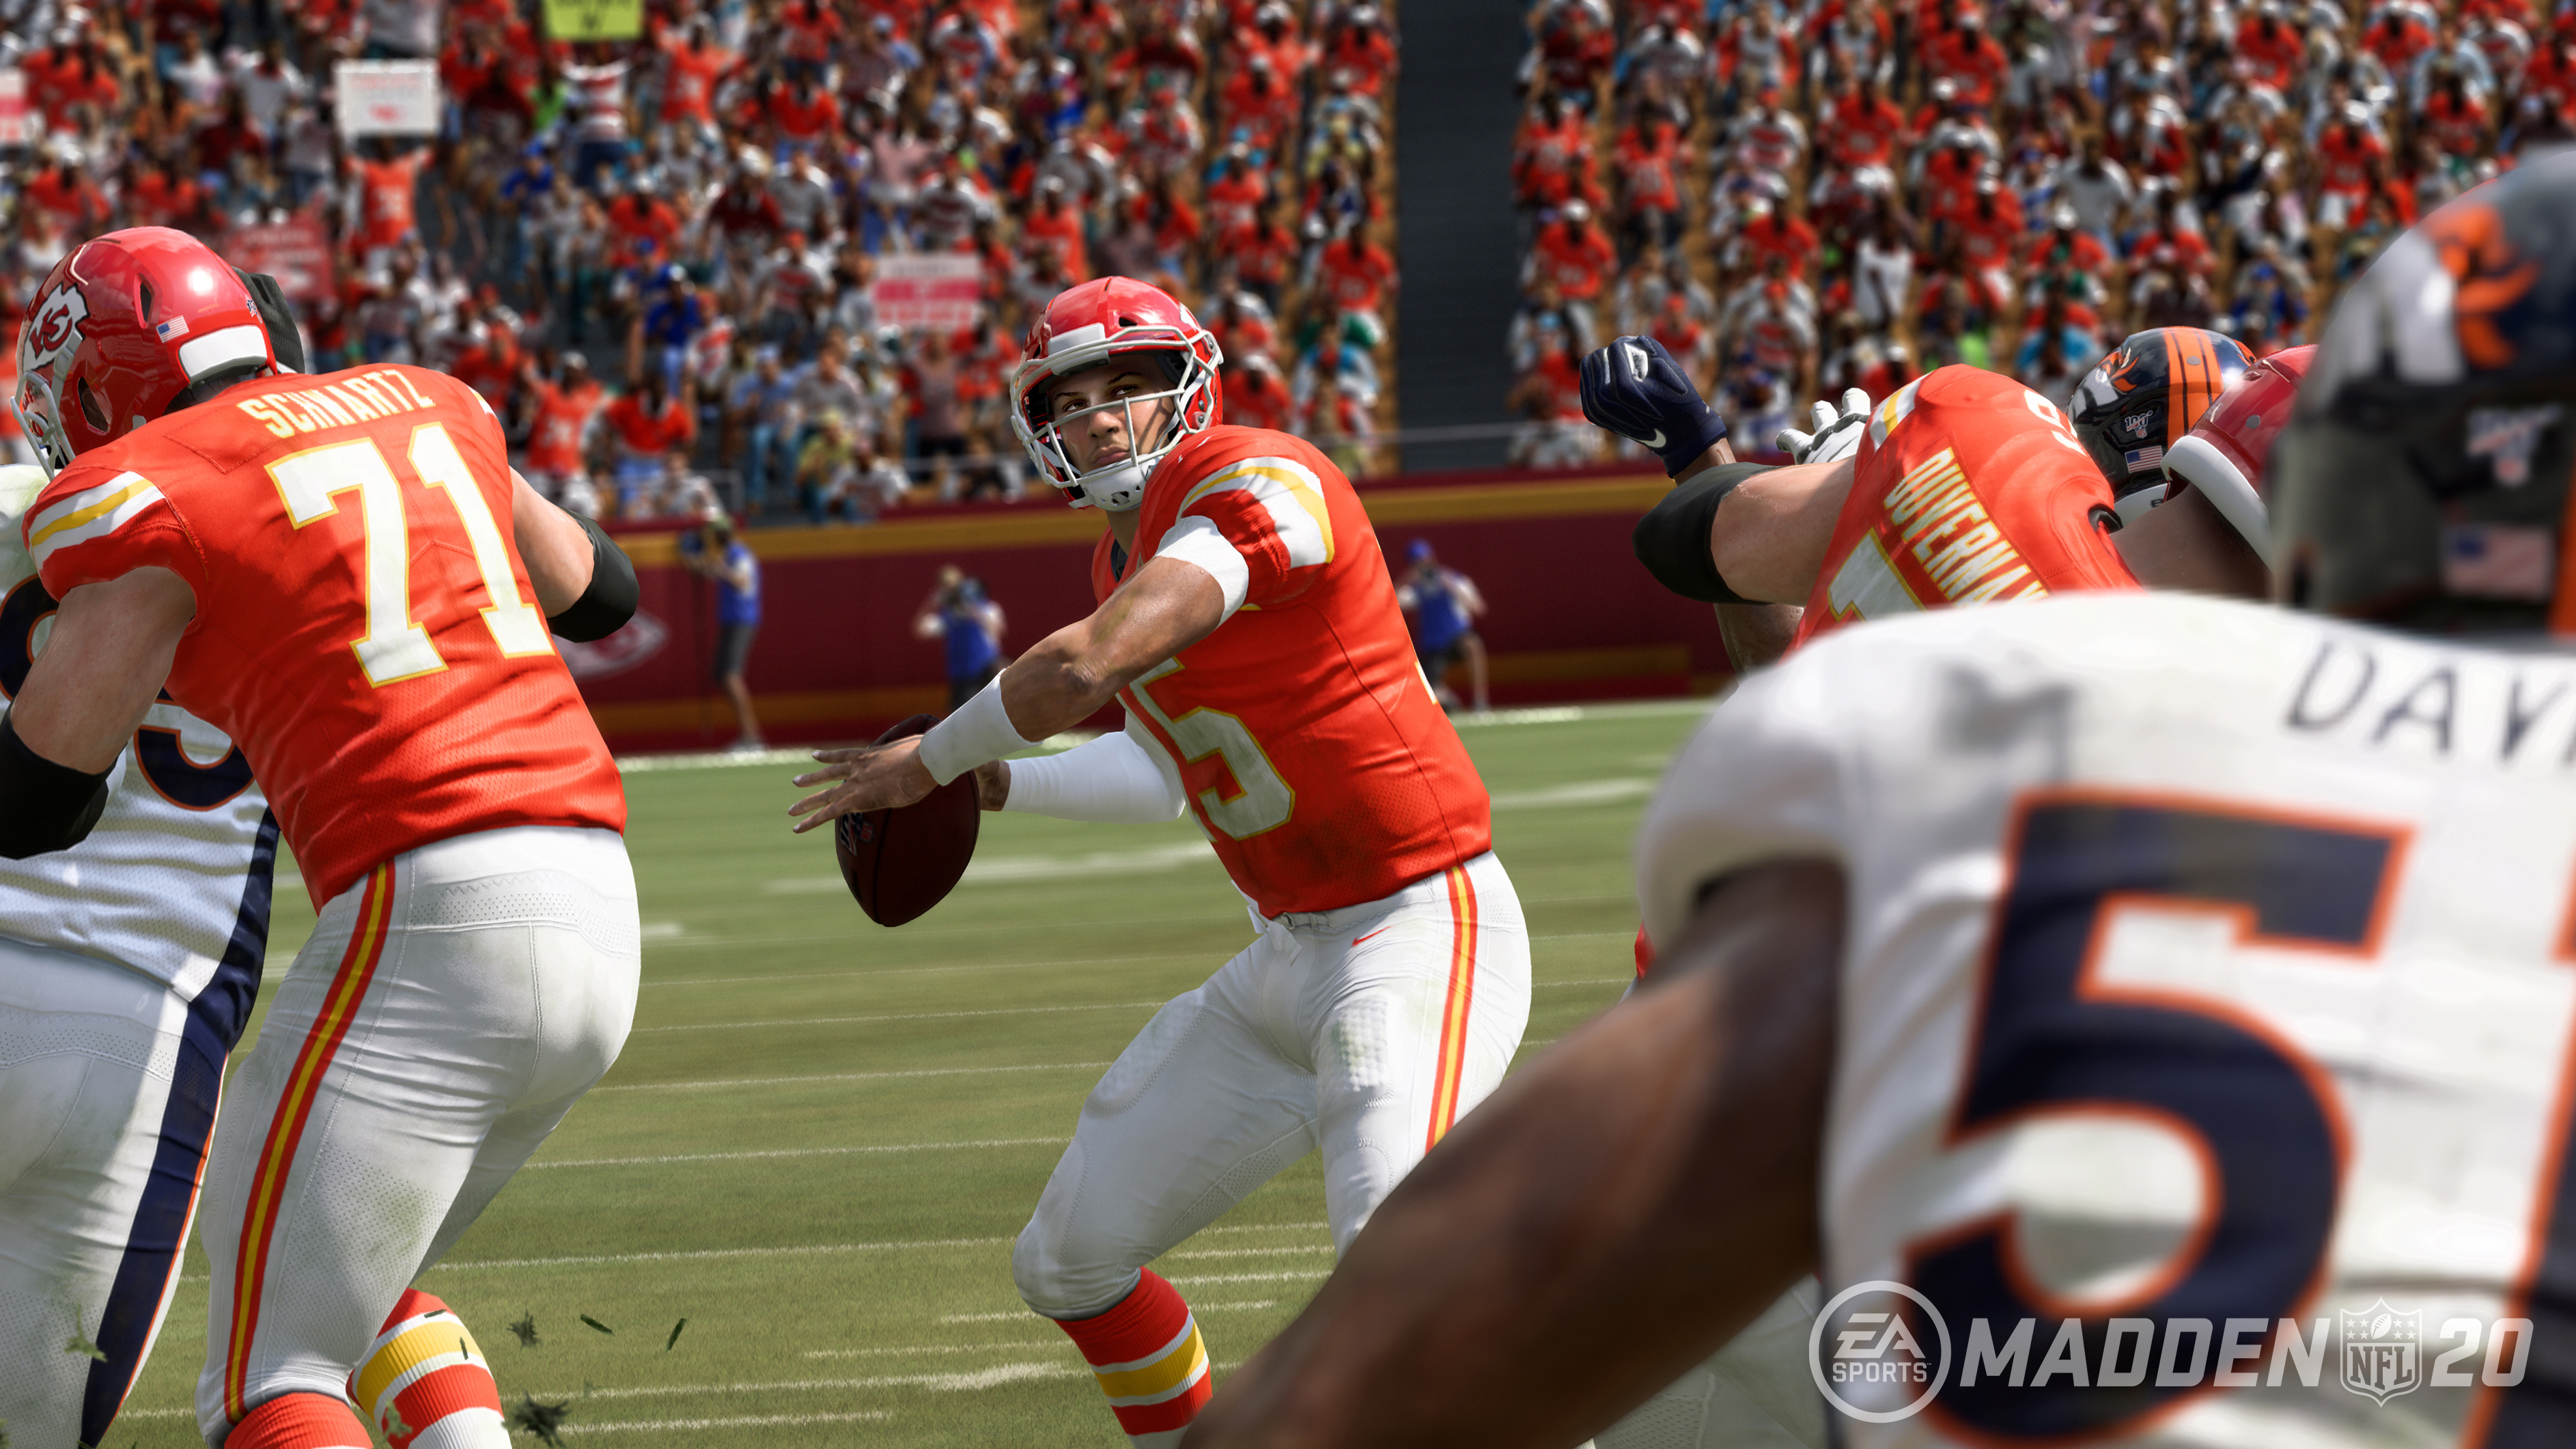 EA Play lining up rewards for Madden NFL 24, Apex Legends, and